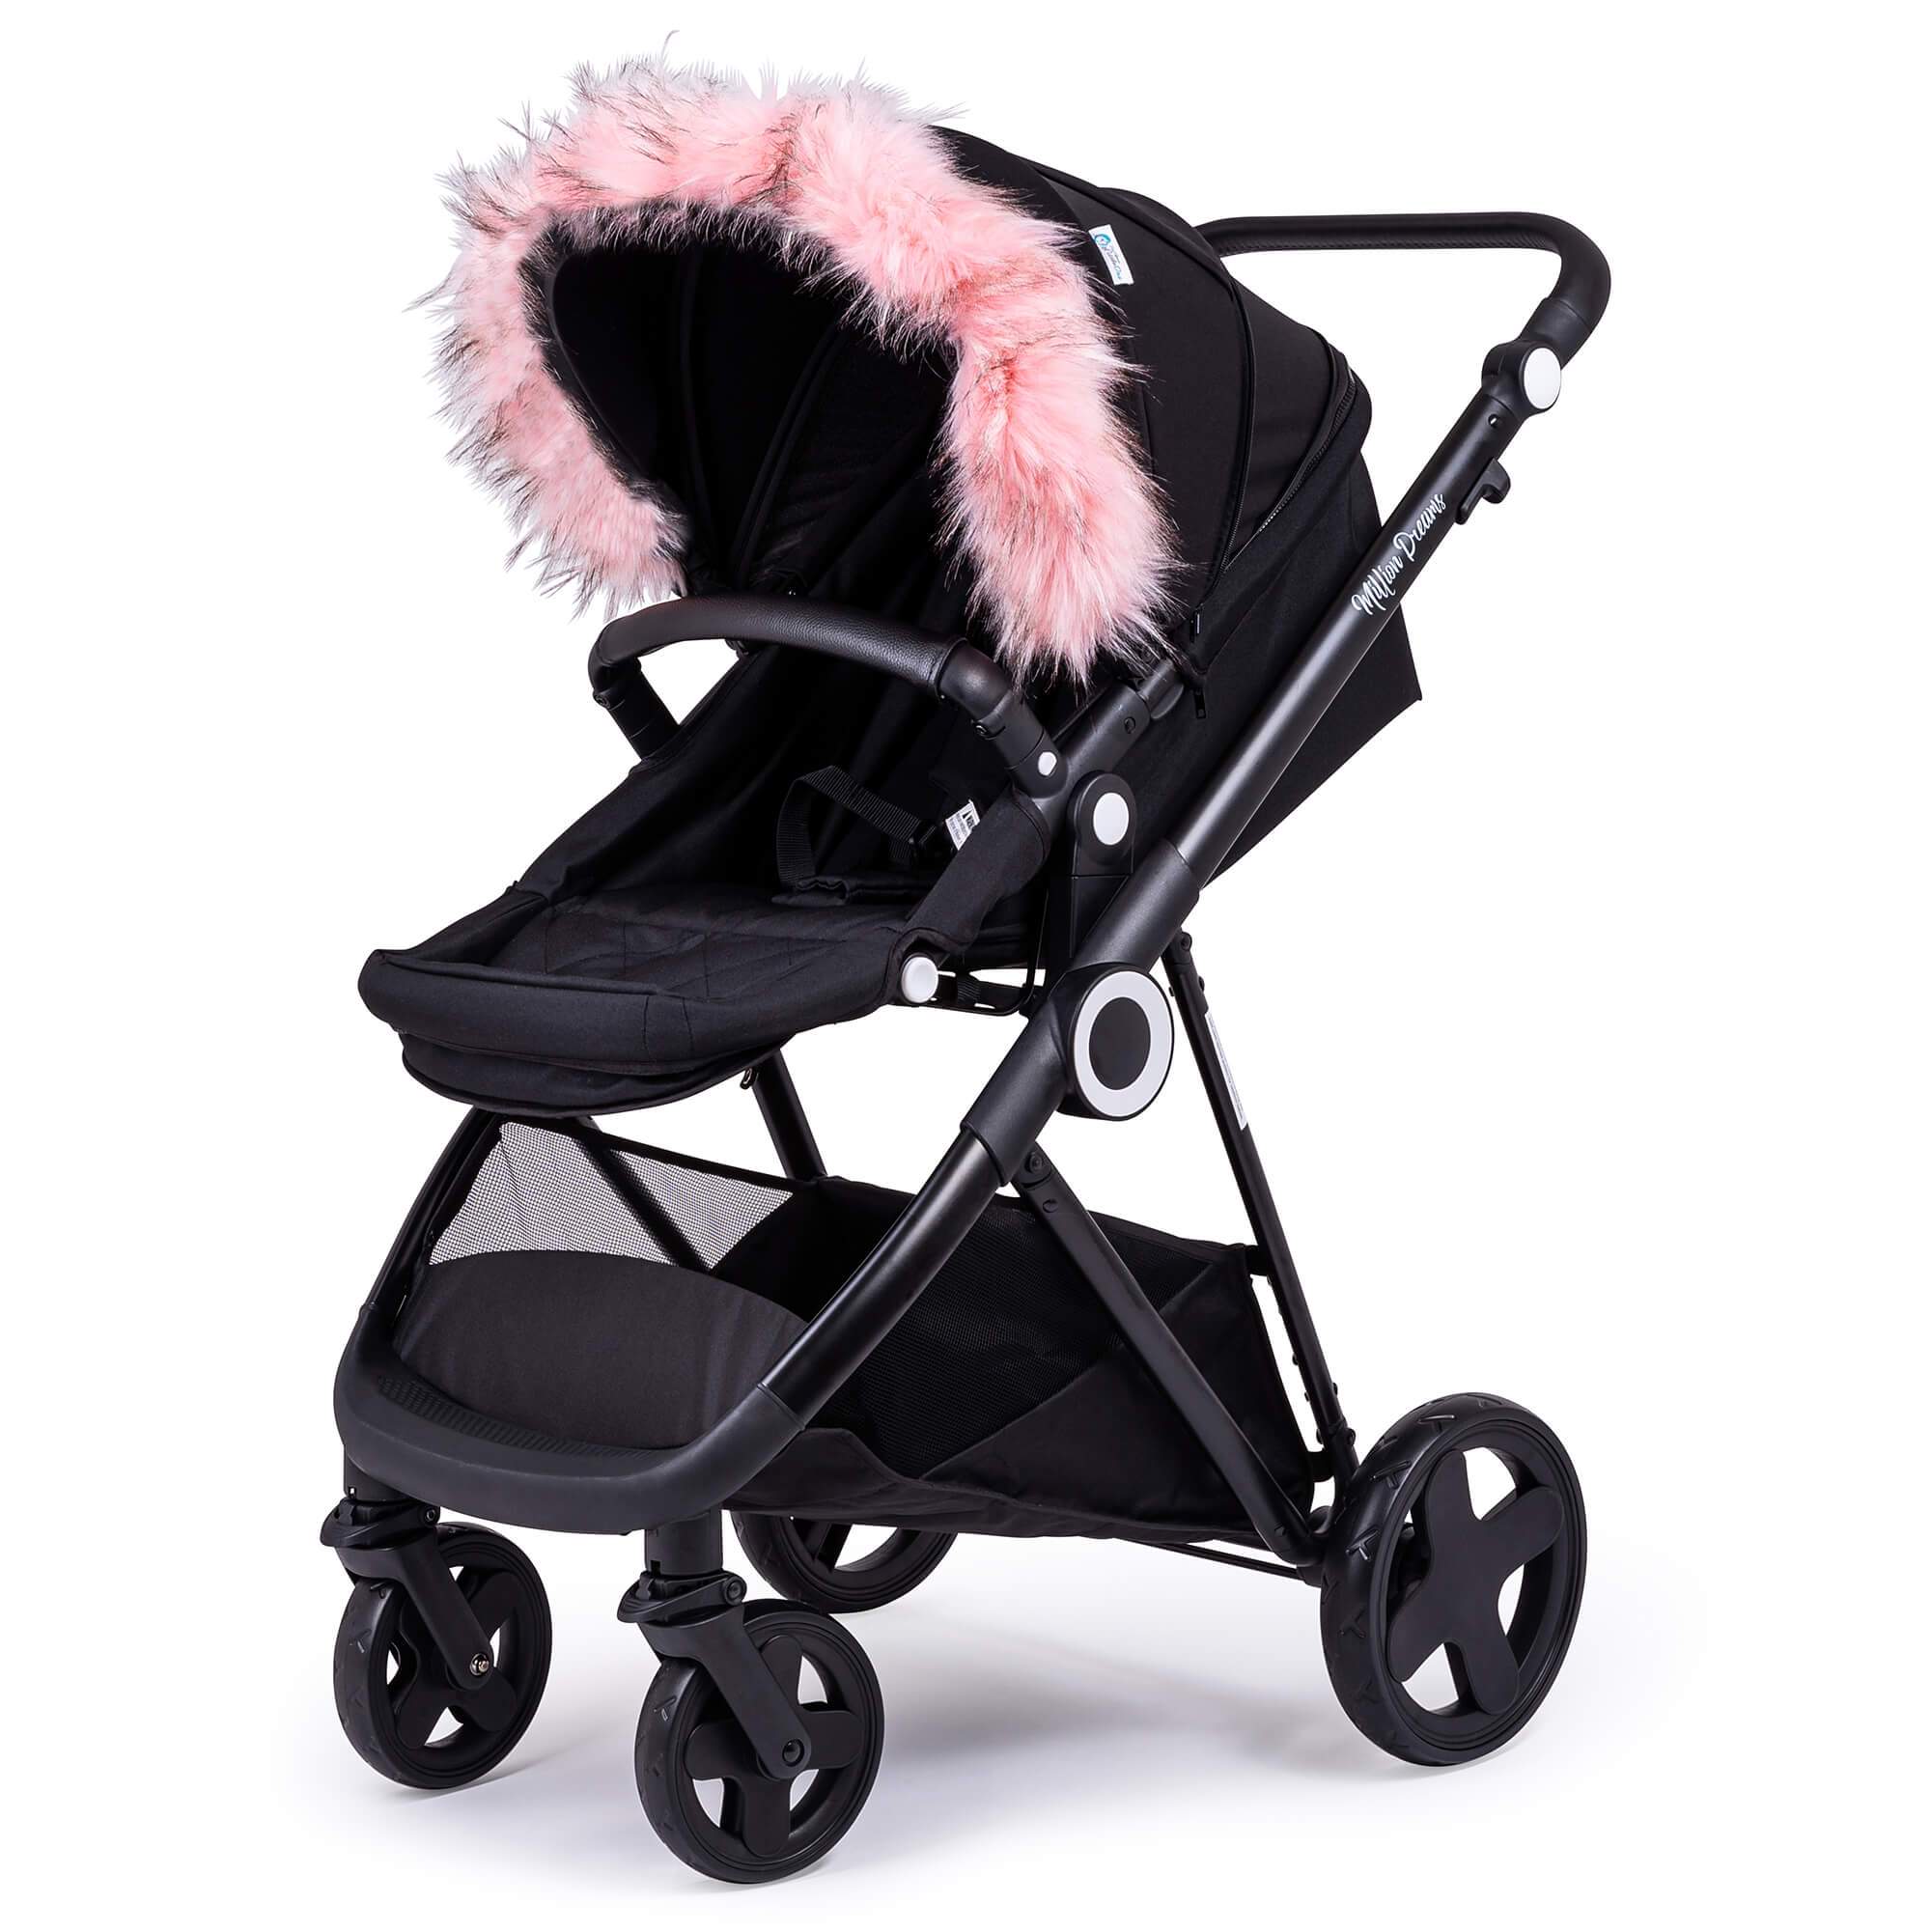 Pram Fur Hood Trim Attachment for Pushchair Compatible with Maclaren - Light Pink / Fits All Models | For Your Little One